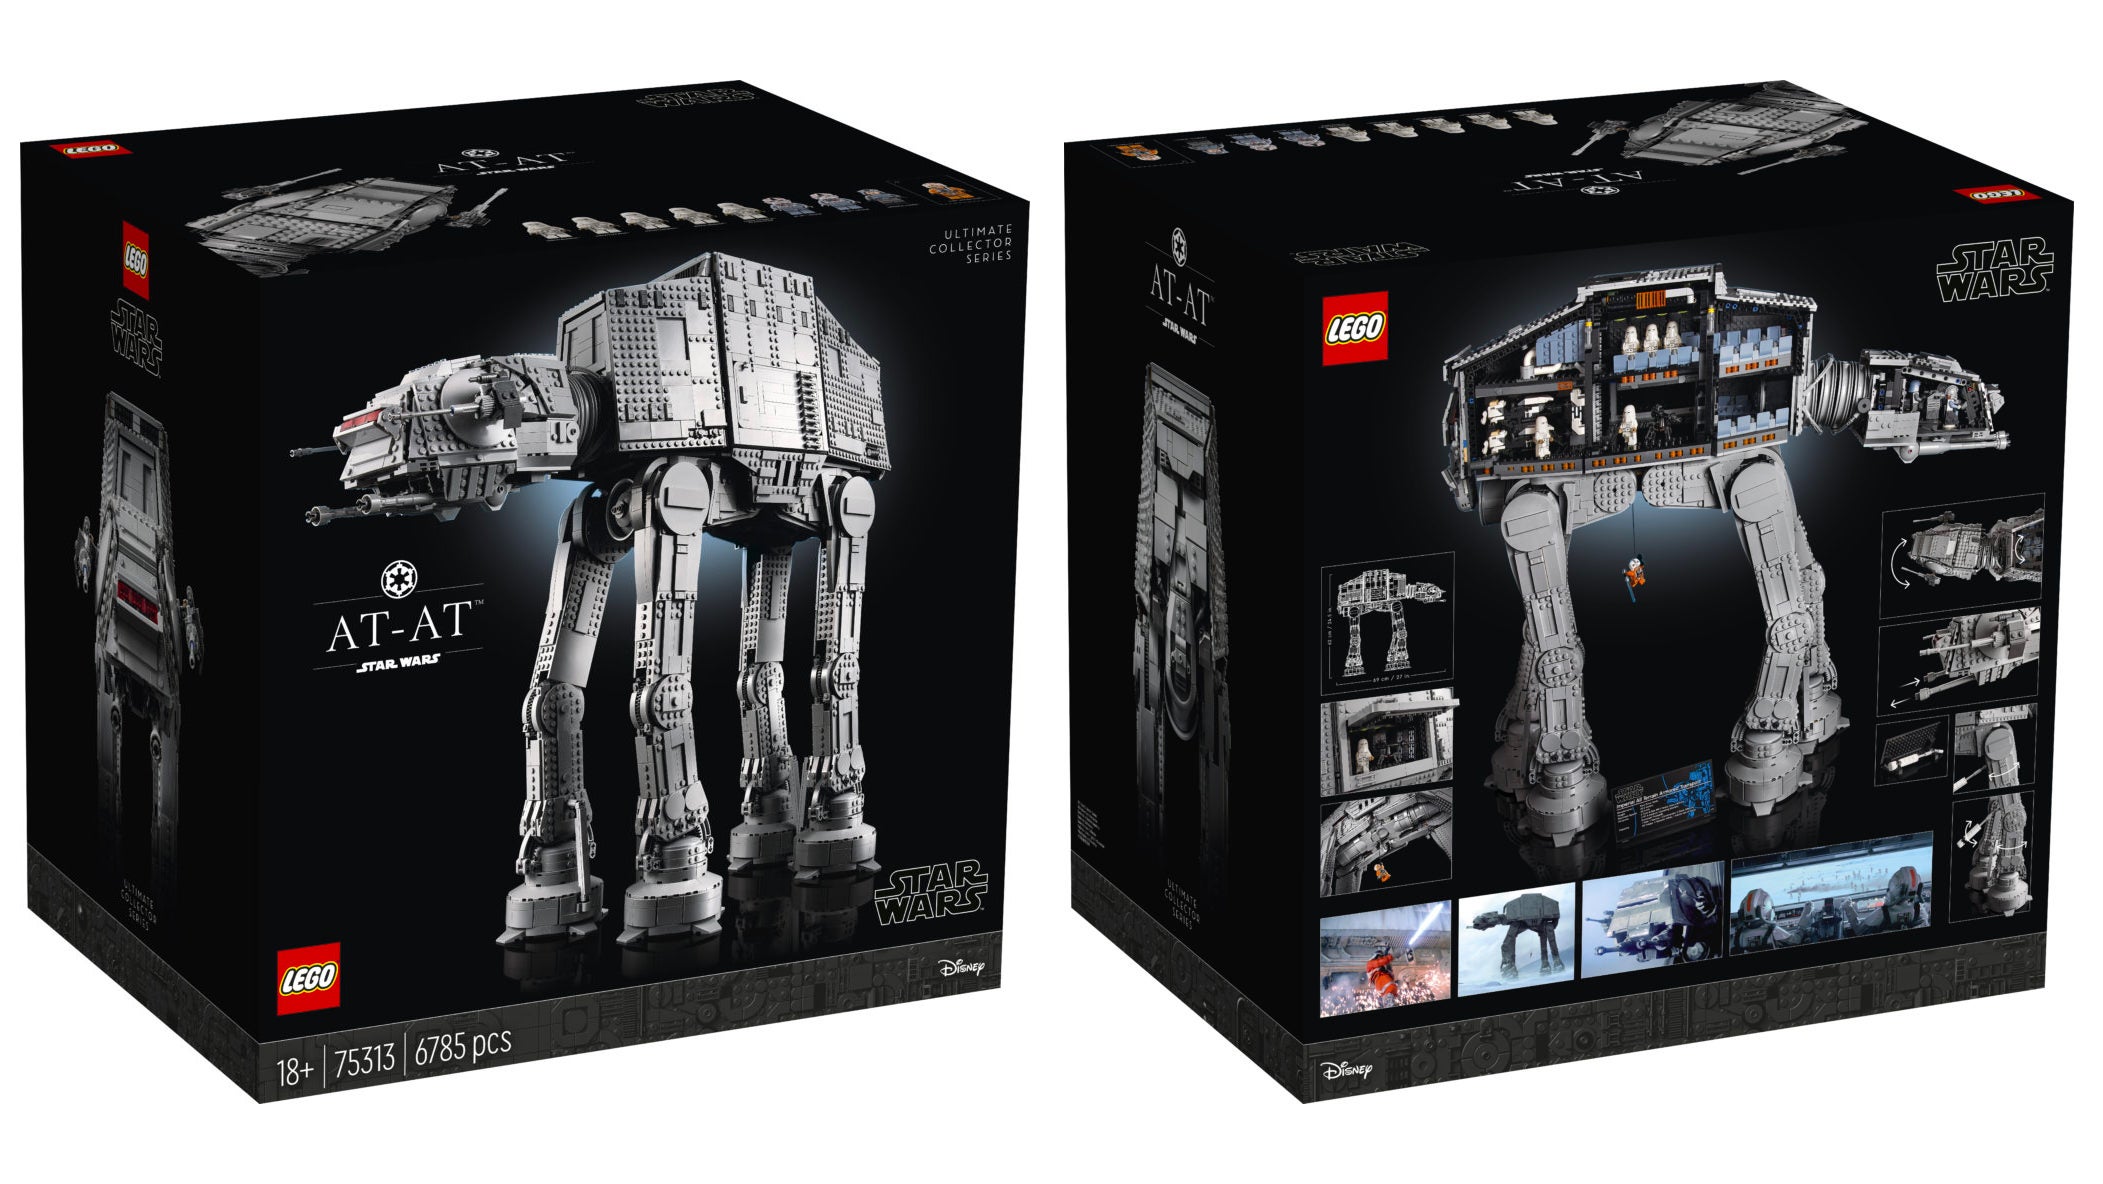 8 Ways to Justify Spending A$1,084 on Lego’s Massive New Star Wars AT-AT Set